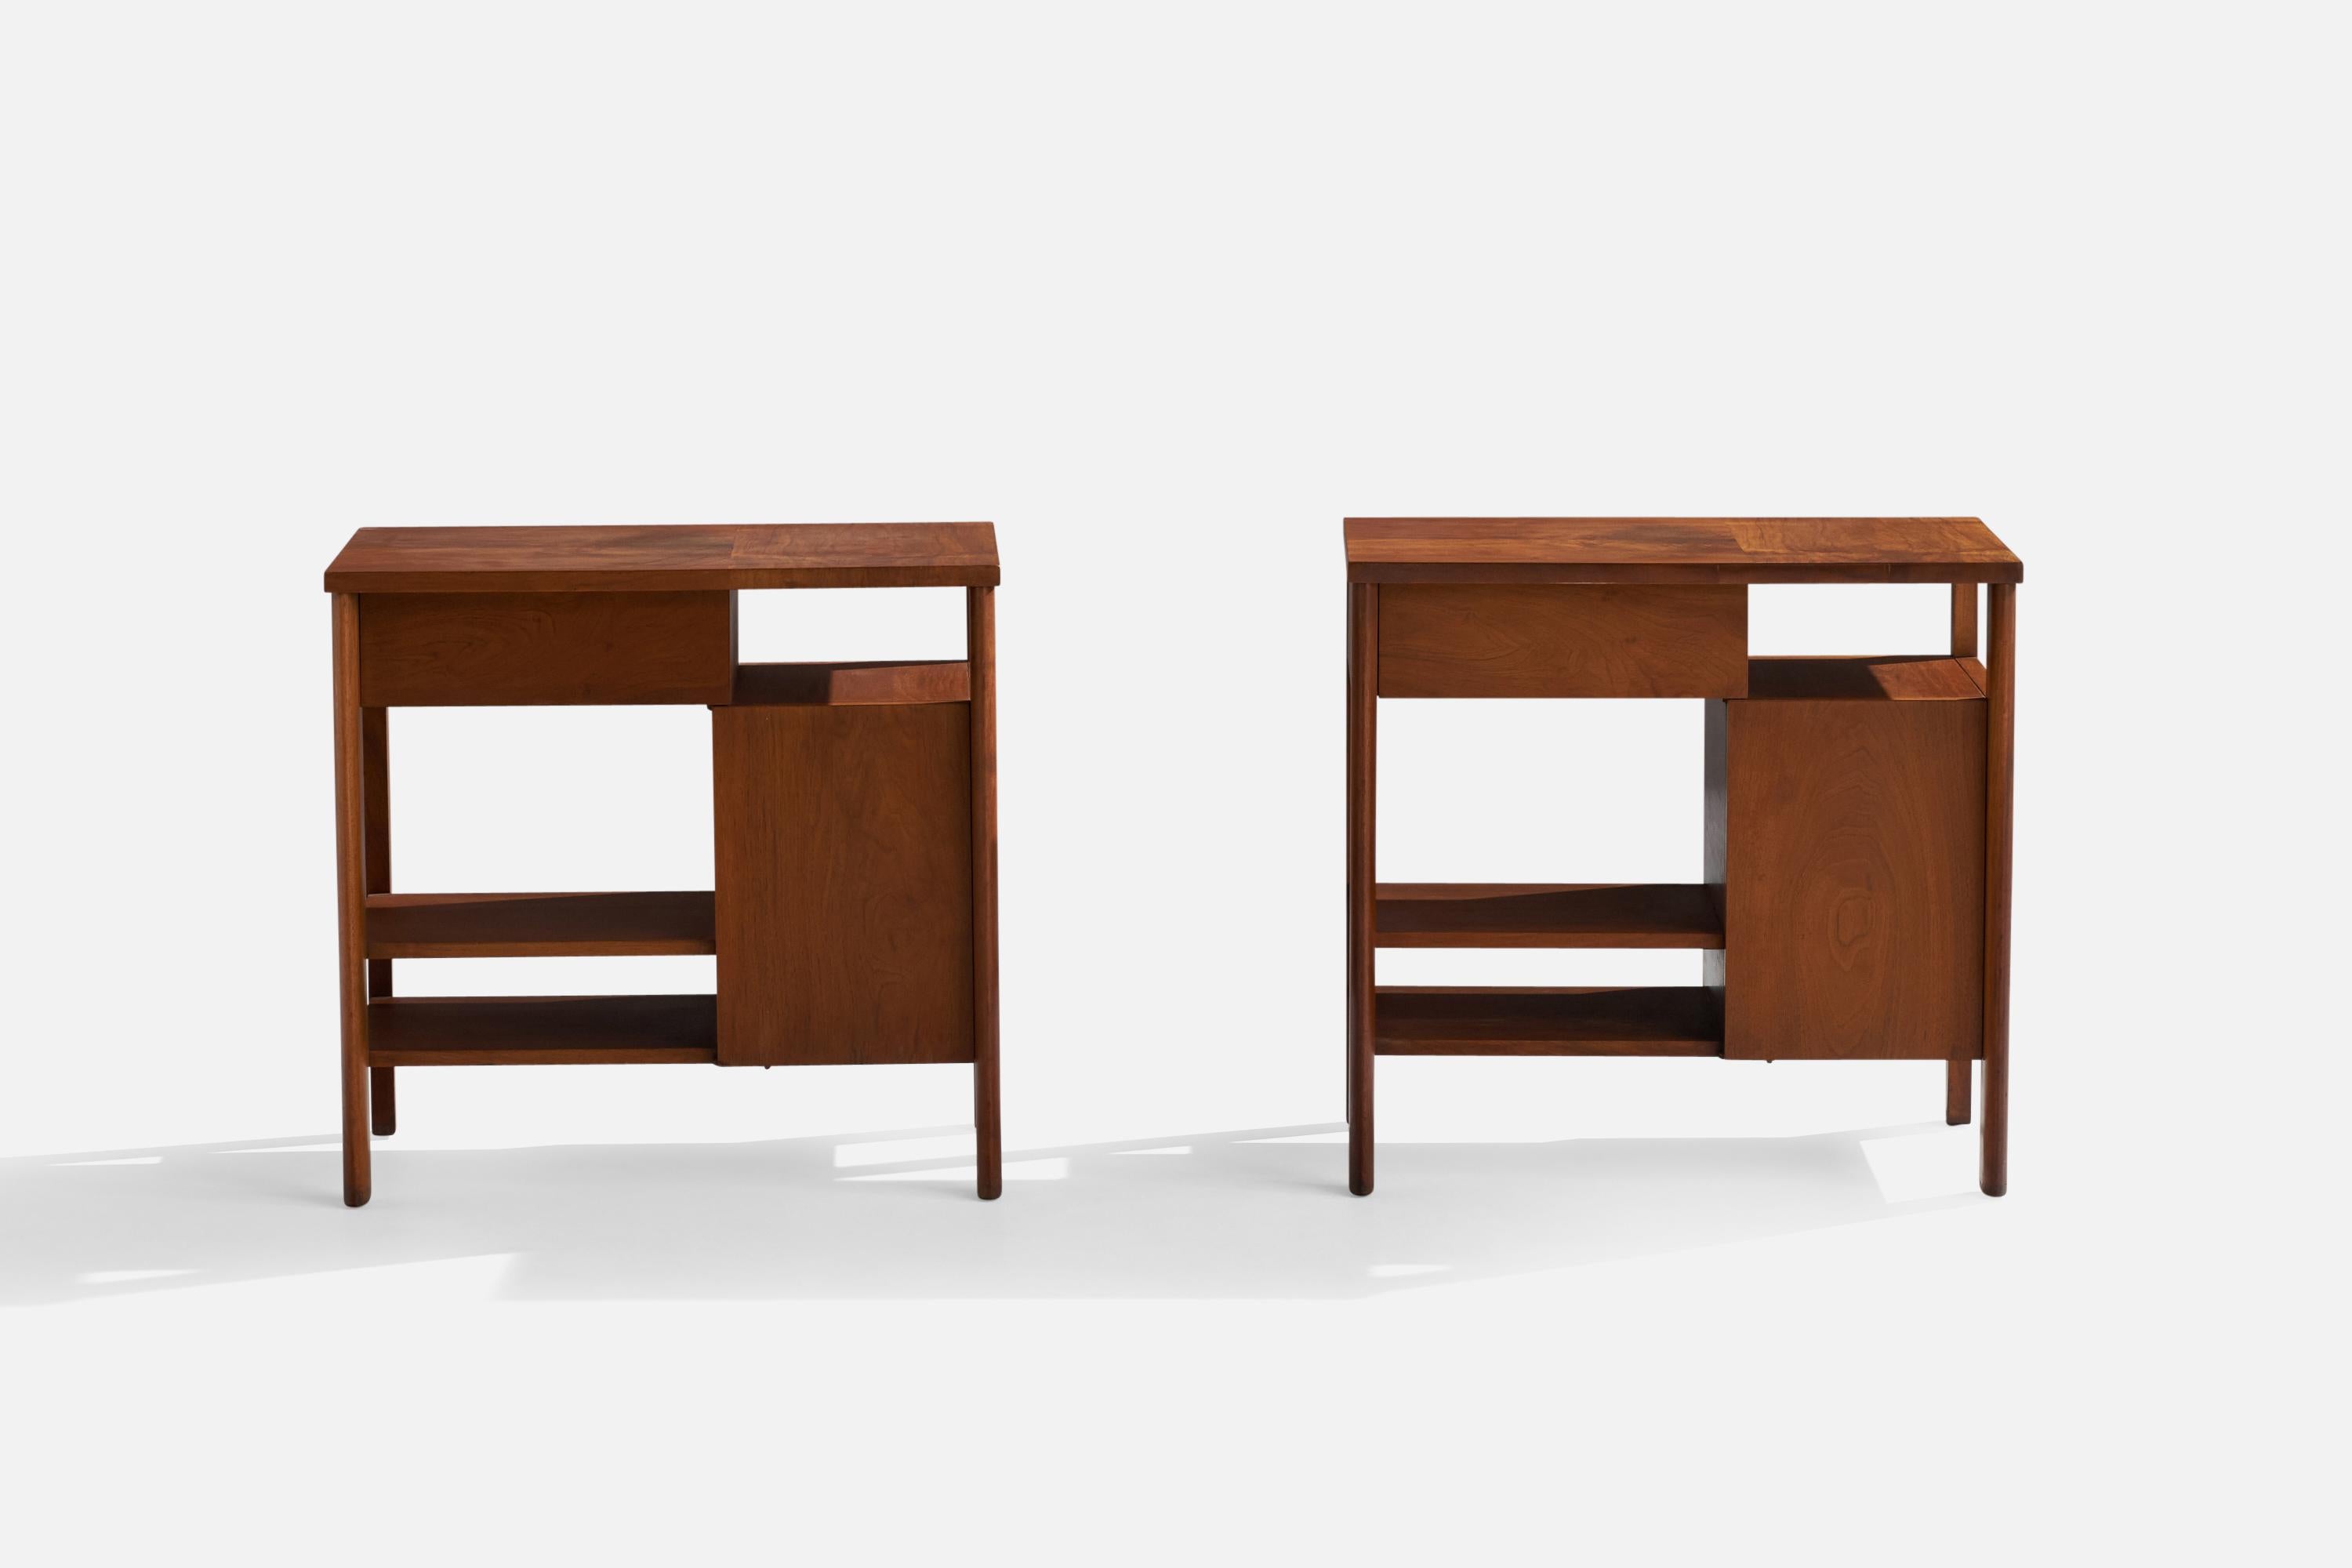 A pair of walnut nightstands or bedside cabinets designed and produced by John Widdicomb, Grand Rapids, Michigan, USA, 1950s.